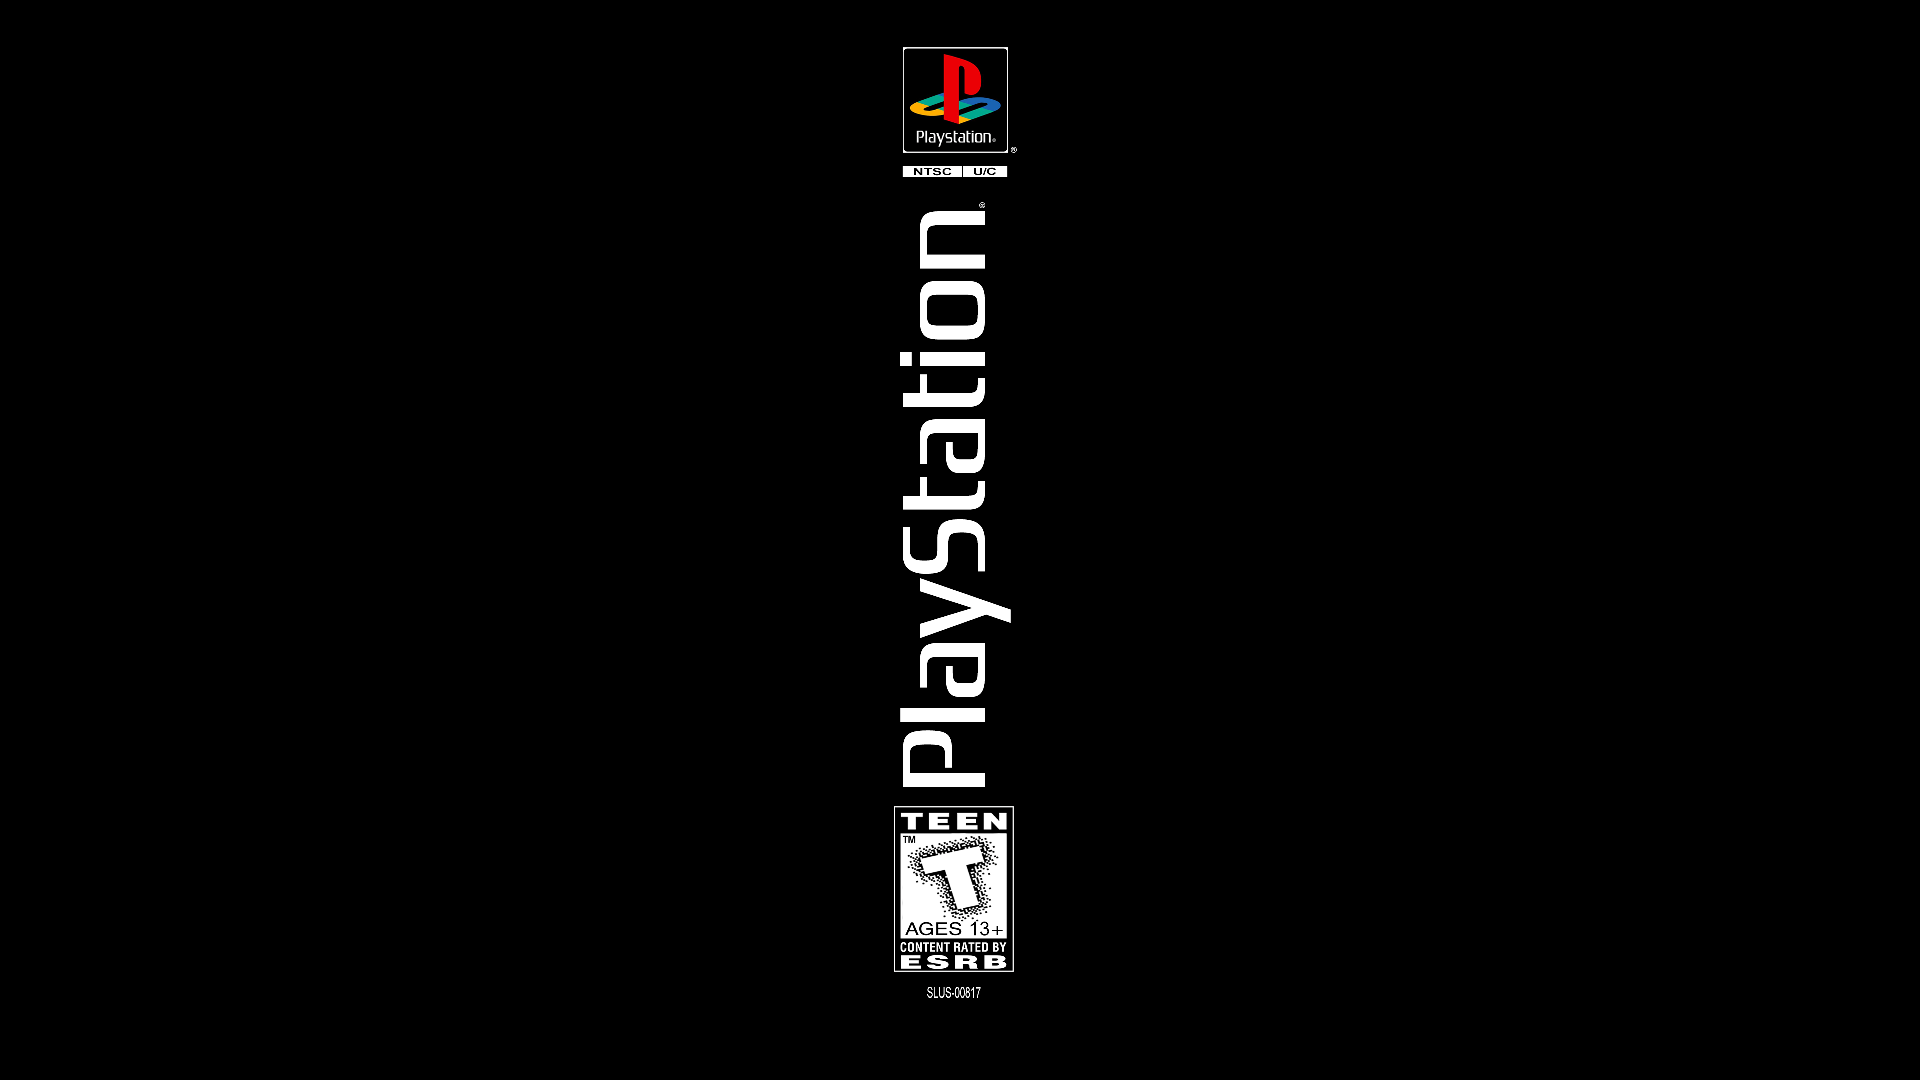 Image PS1 cover wallpaper